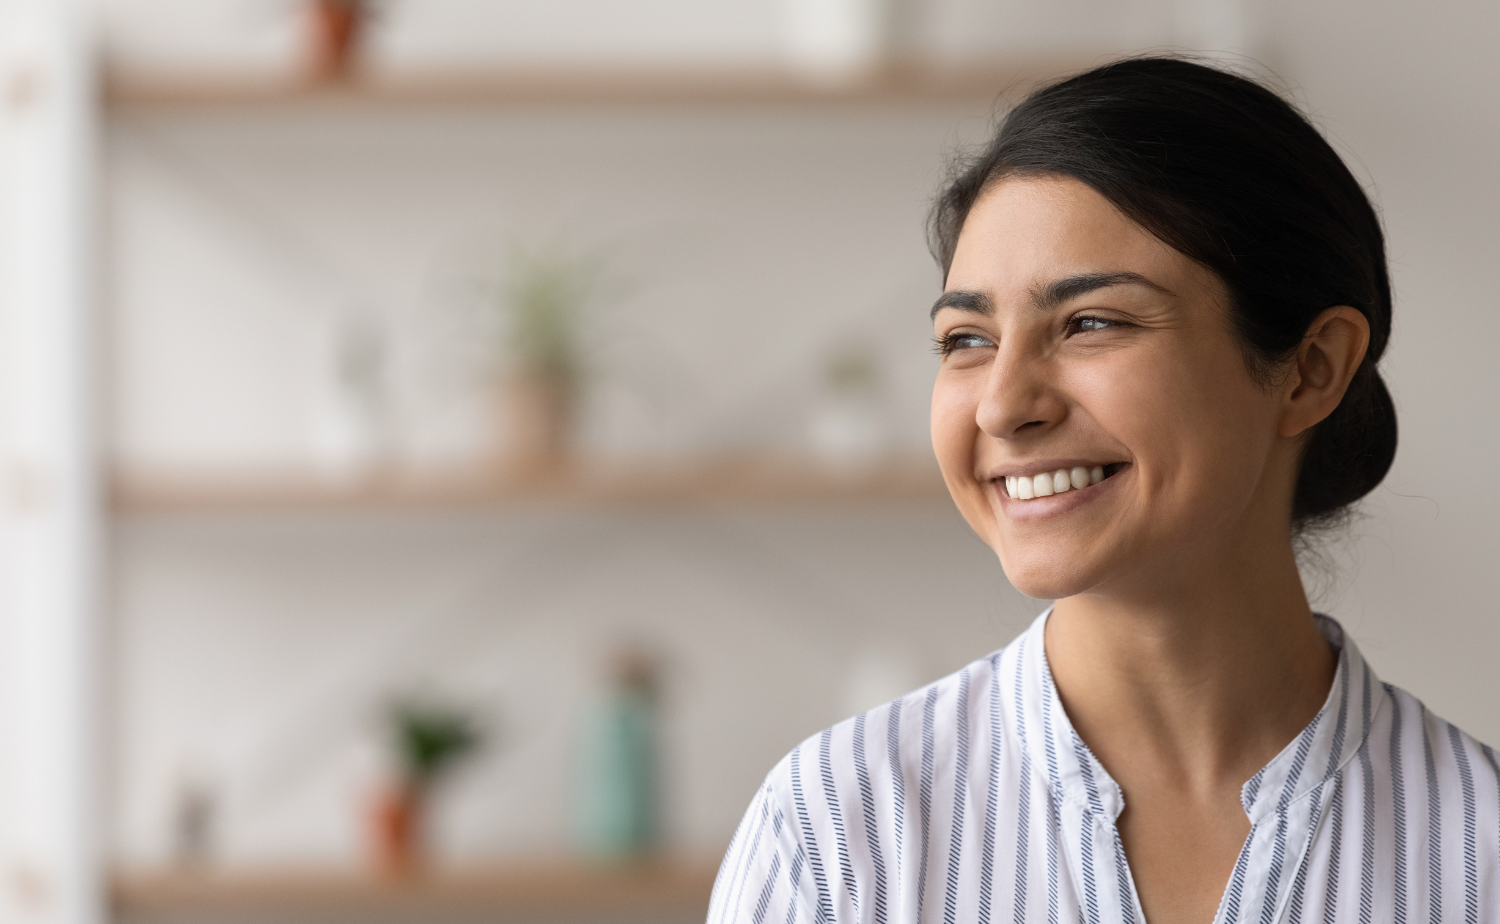 A young professional woman with dark hair smiles confidently while looking off to the side, set against a softly blurred background with shelves and plants, conveying positivity and optimism.